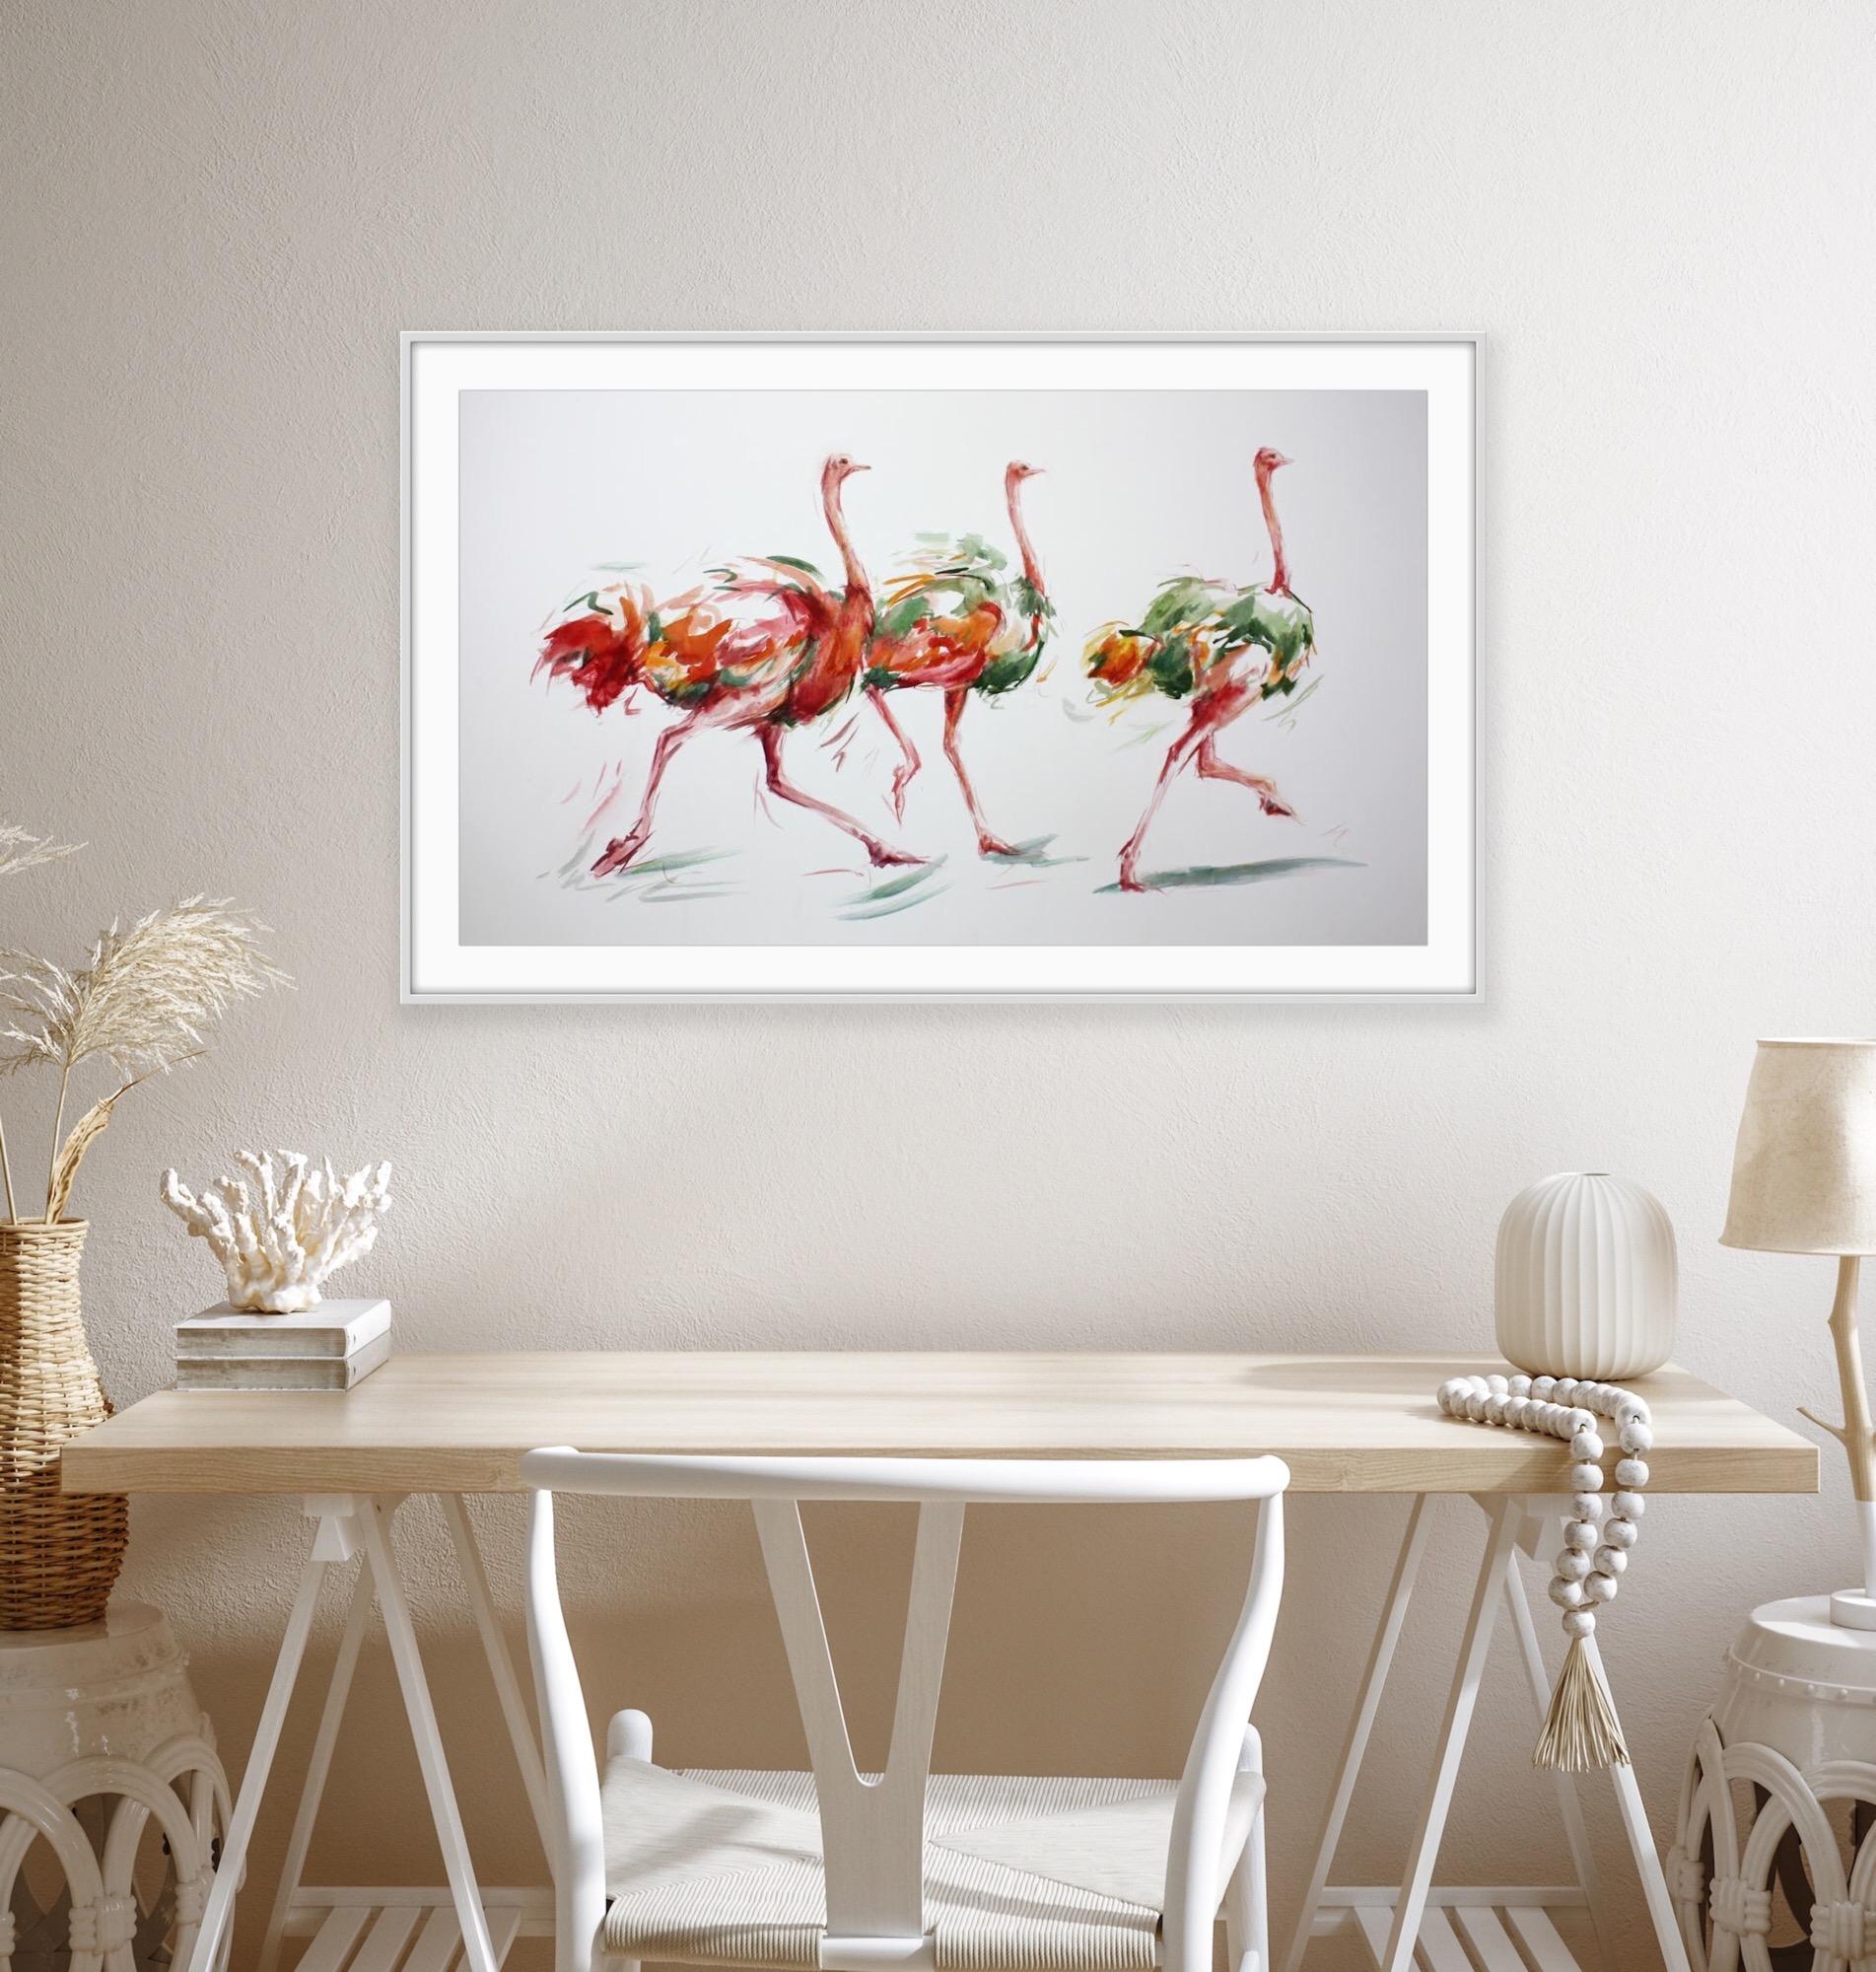 Annabel Pope.

Dancing Trio is a beautiful limited edition print in an edition of 150 print. This print features three ostriches sprinting through the plains. Annabel Pope catches the movement of these three magnificent birds within her work